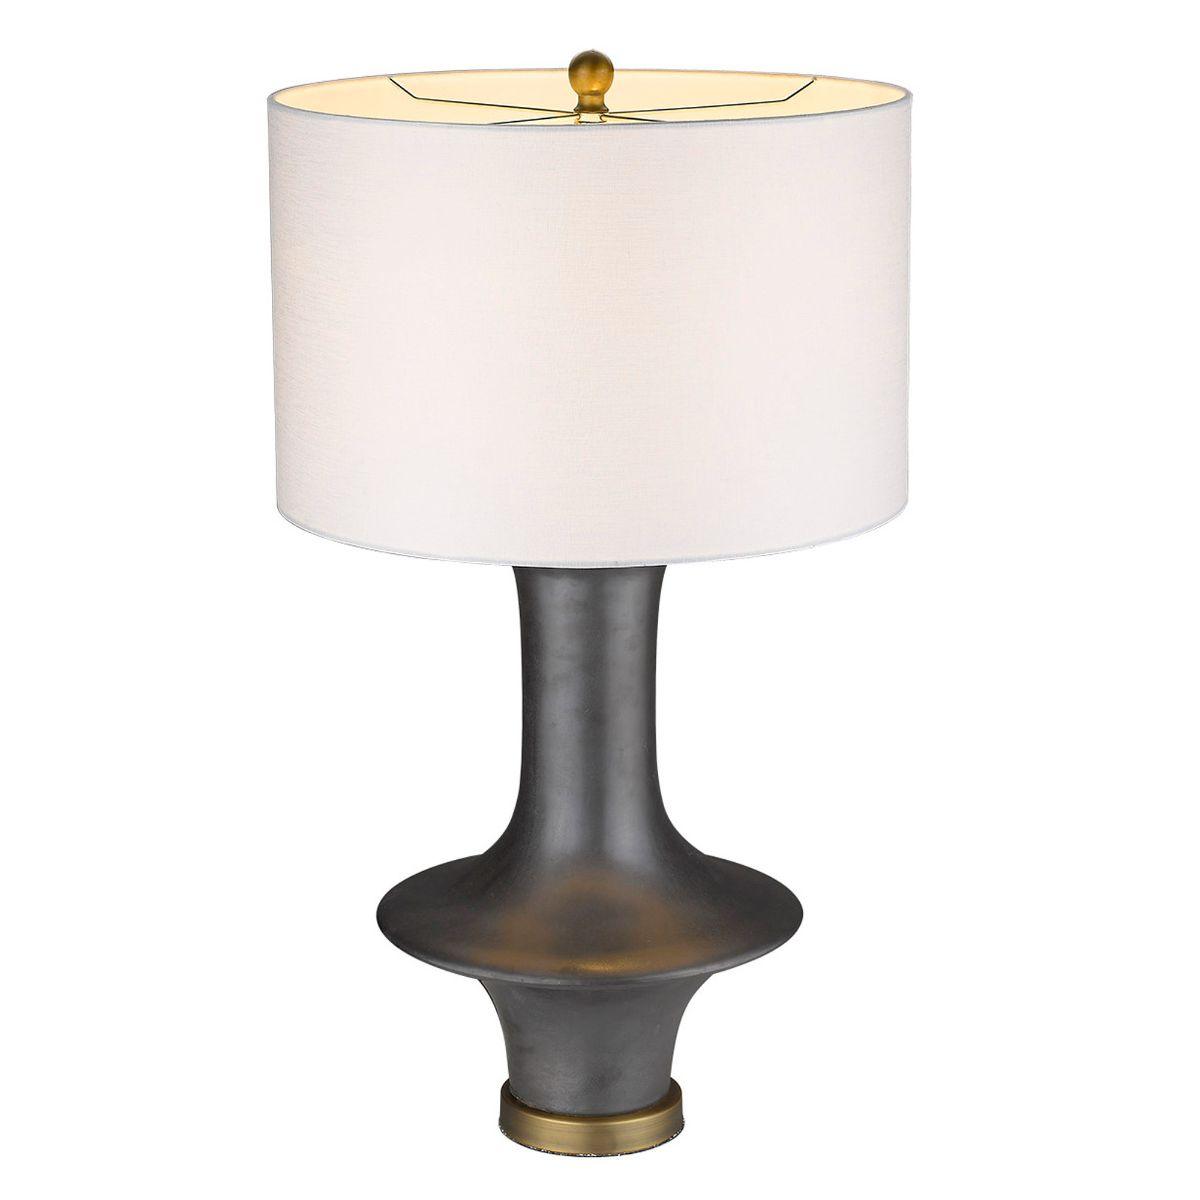 Trend Home 1 Light Table Lamp Iron Ceramic Body and Brass Accents